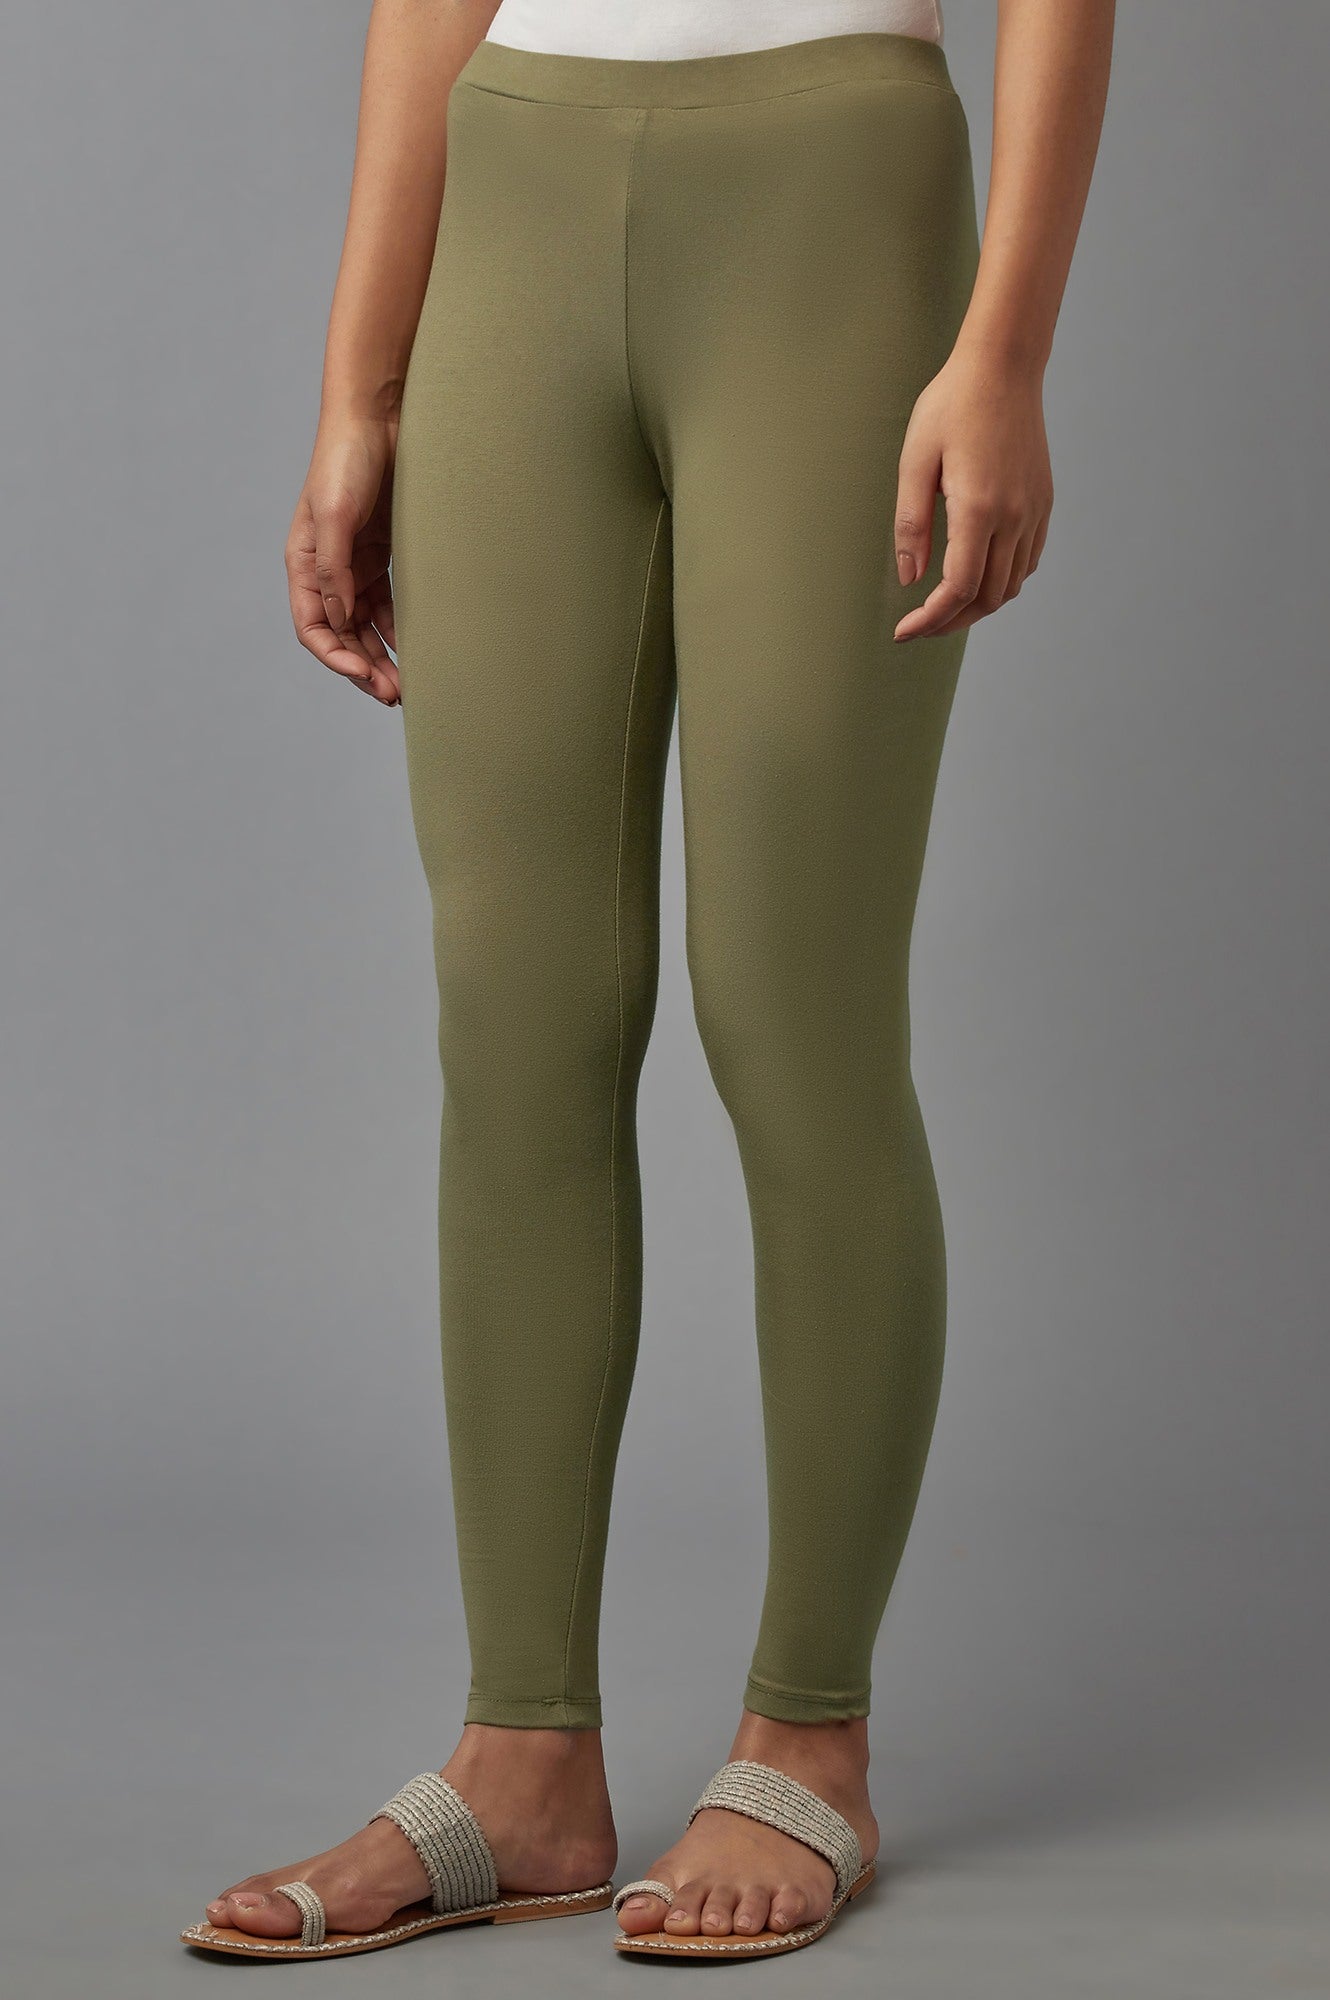 Olive Green Solid Cotton Tights